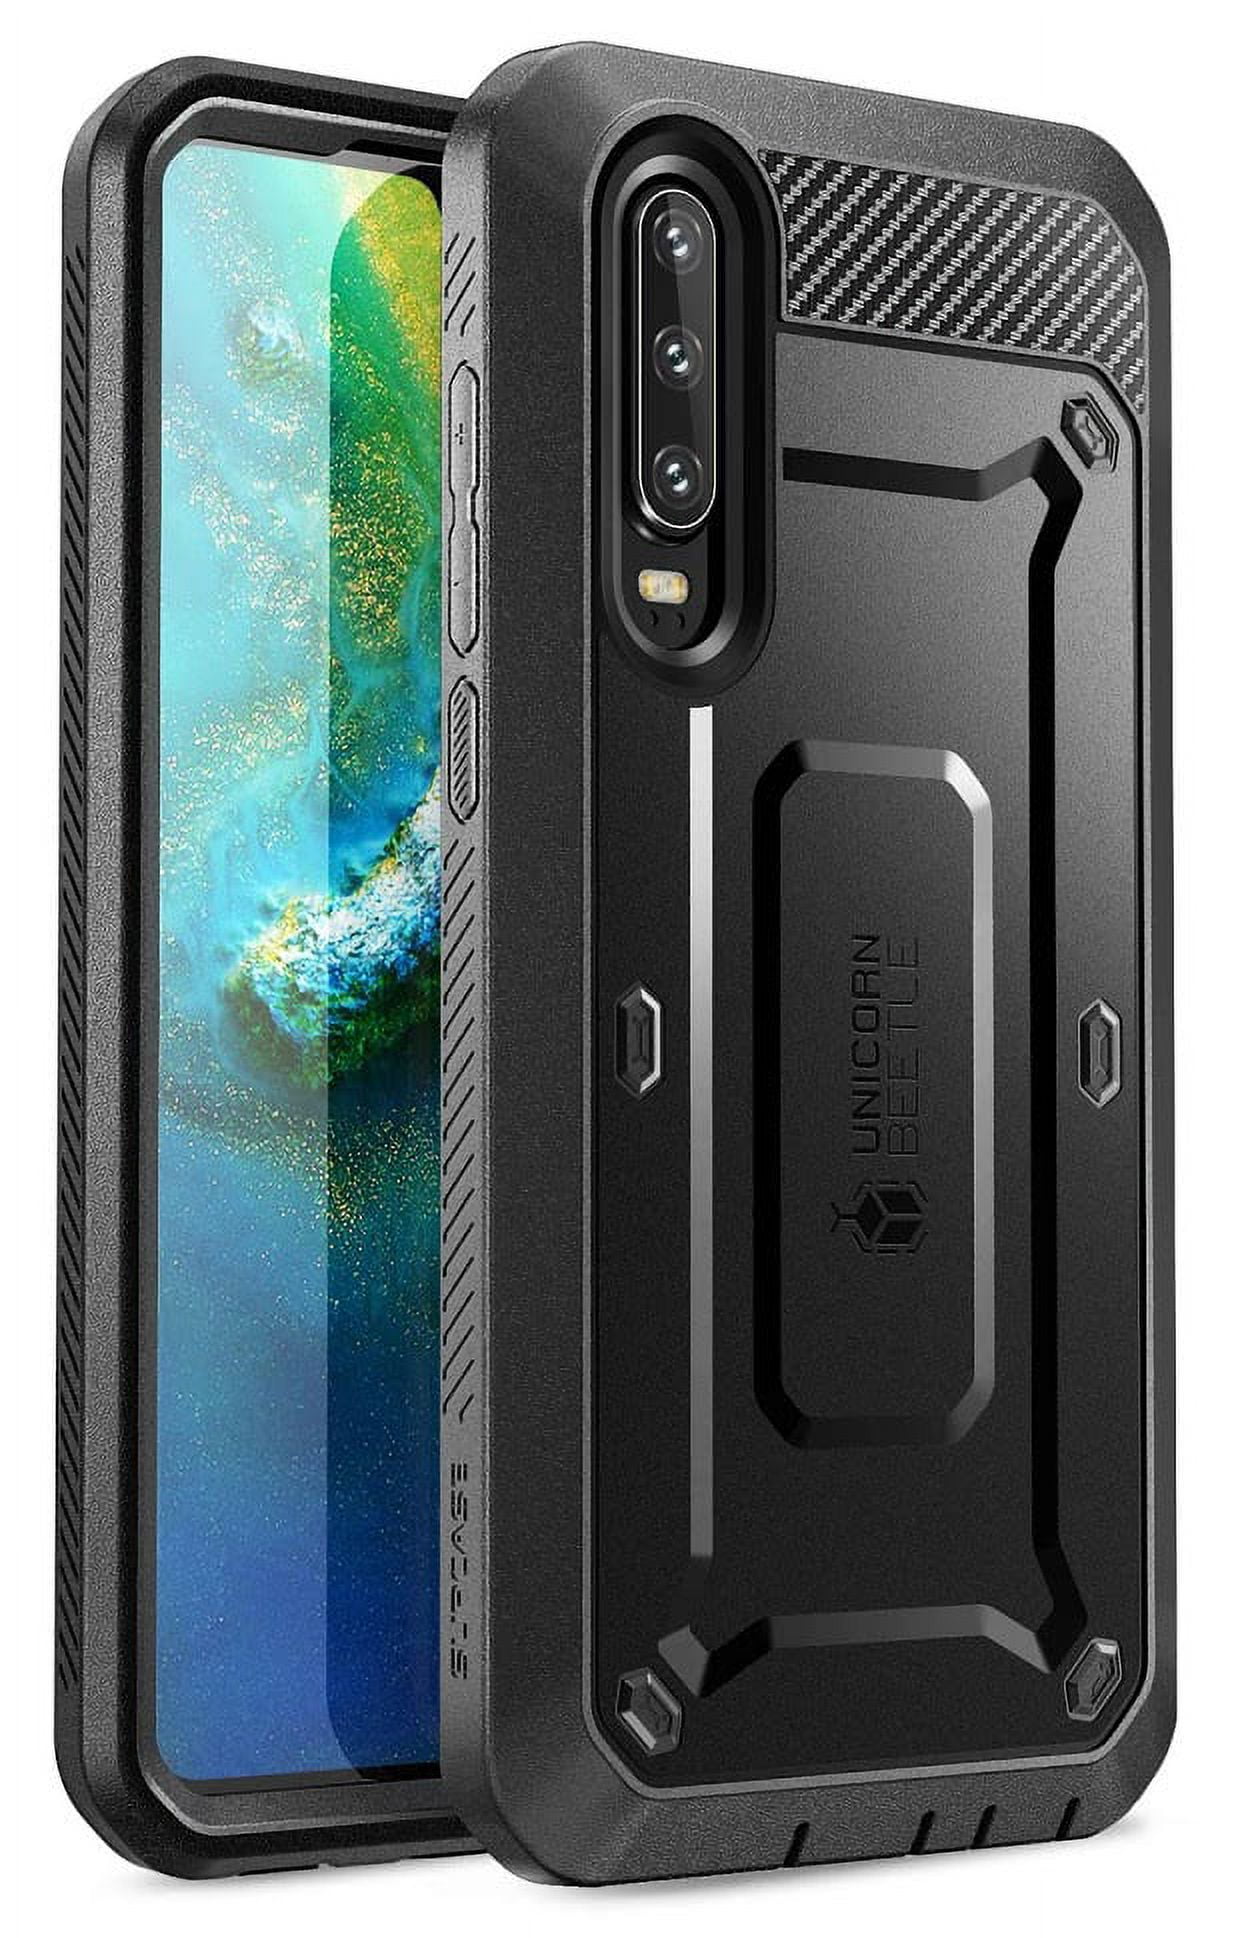 SUPCASE Huawei P30 Pro Case (2019 Release), [Unicorn Beetle Pro Series]  Full-Body Dual Layer Rugged with Holster & Kickstand (Black) - 6.47 inches